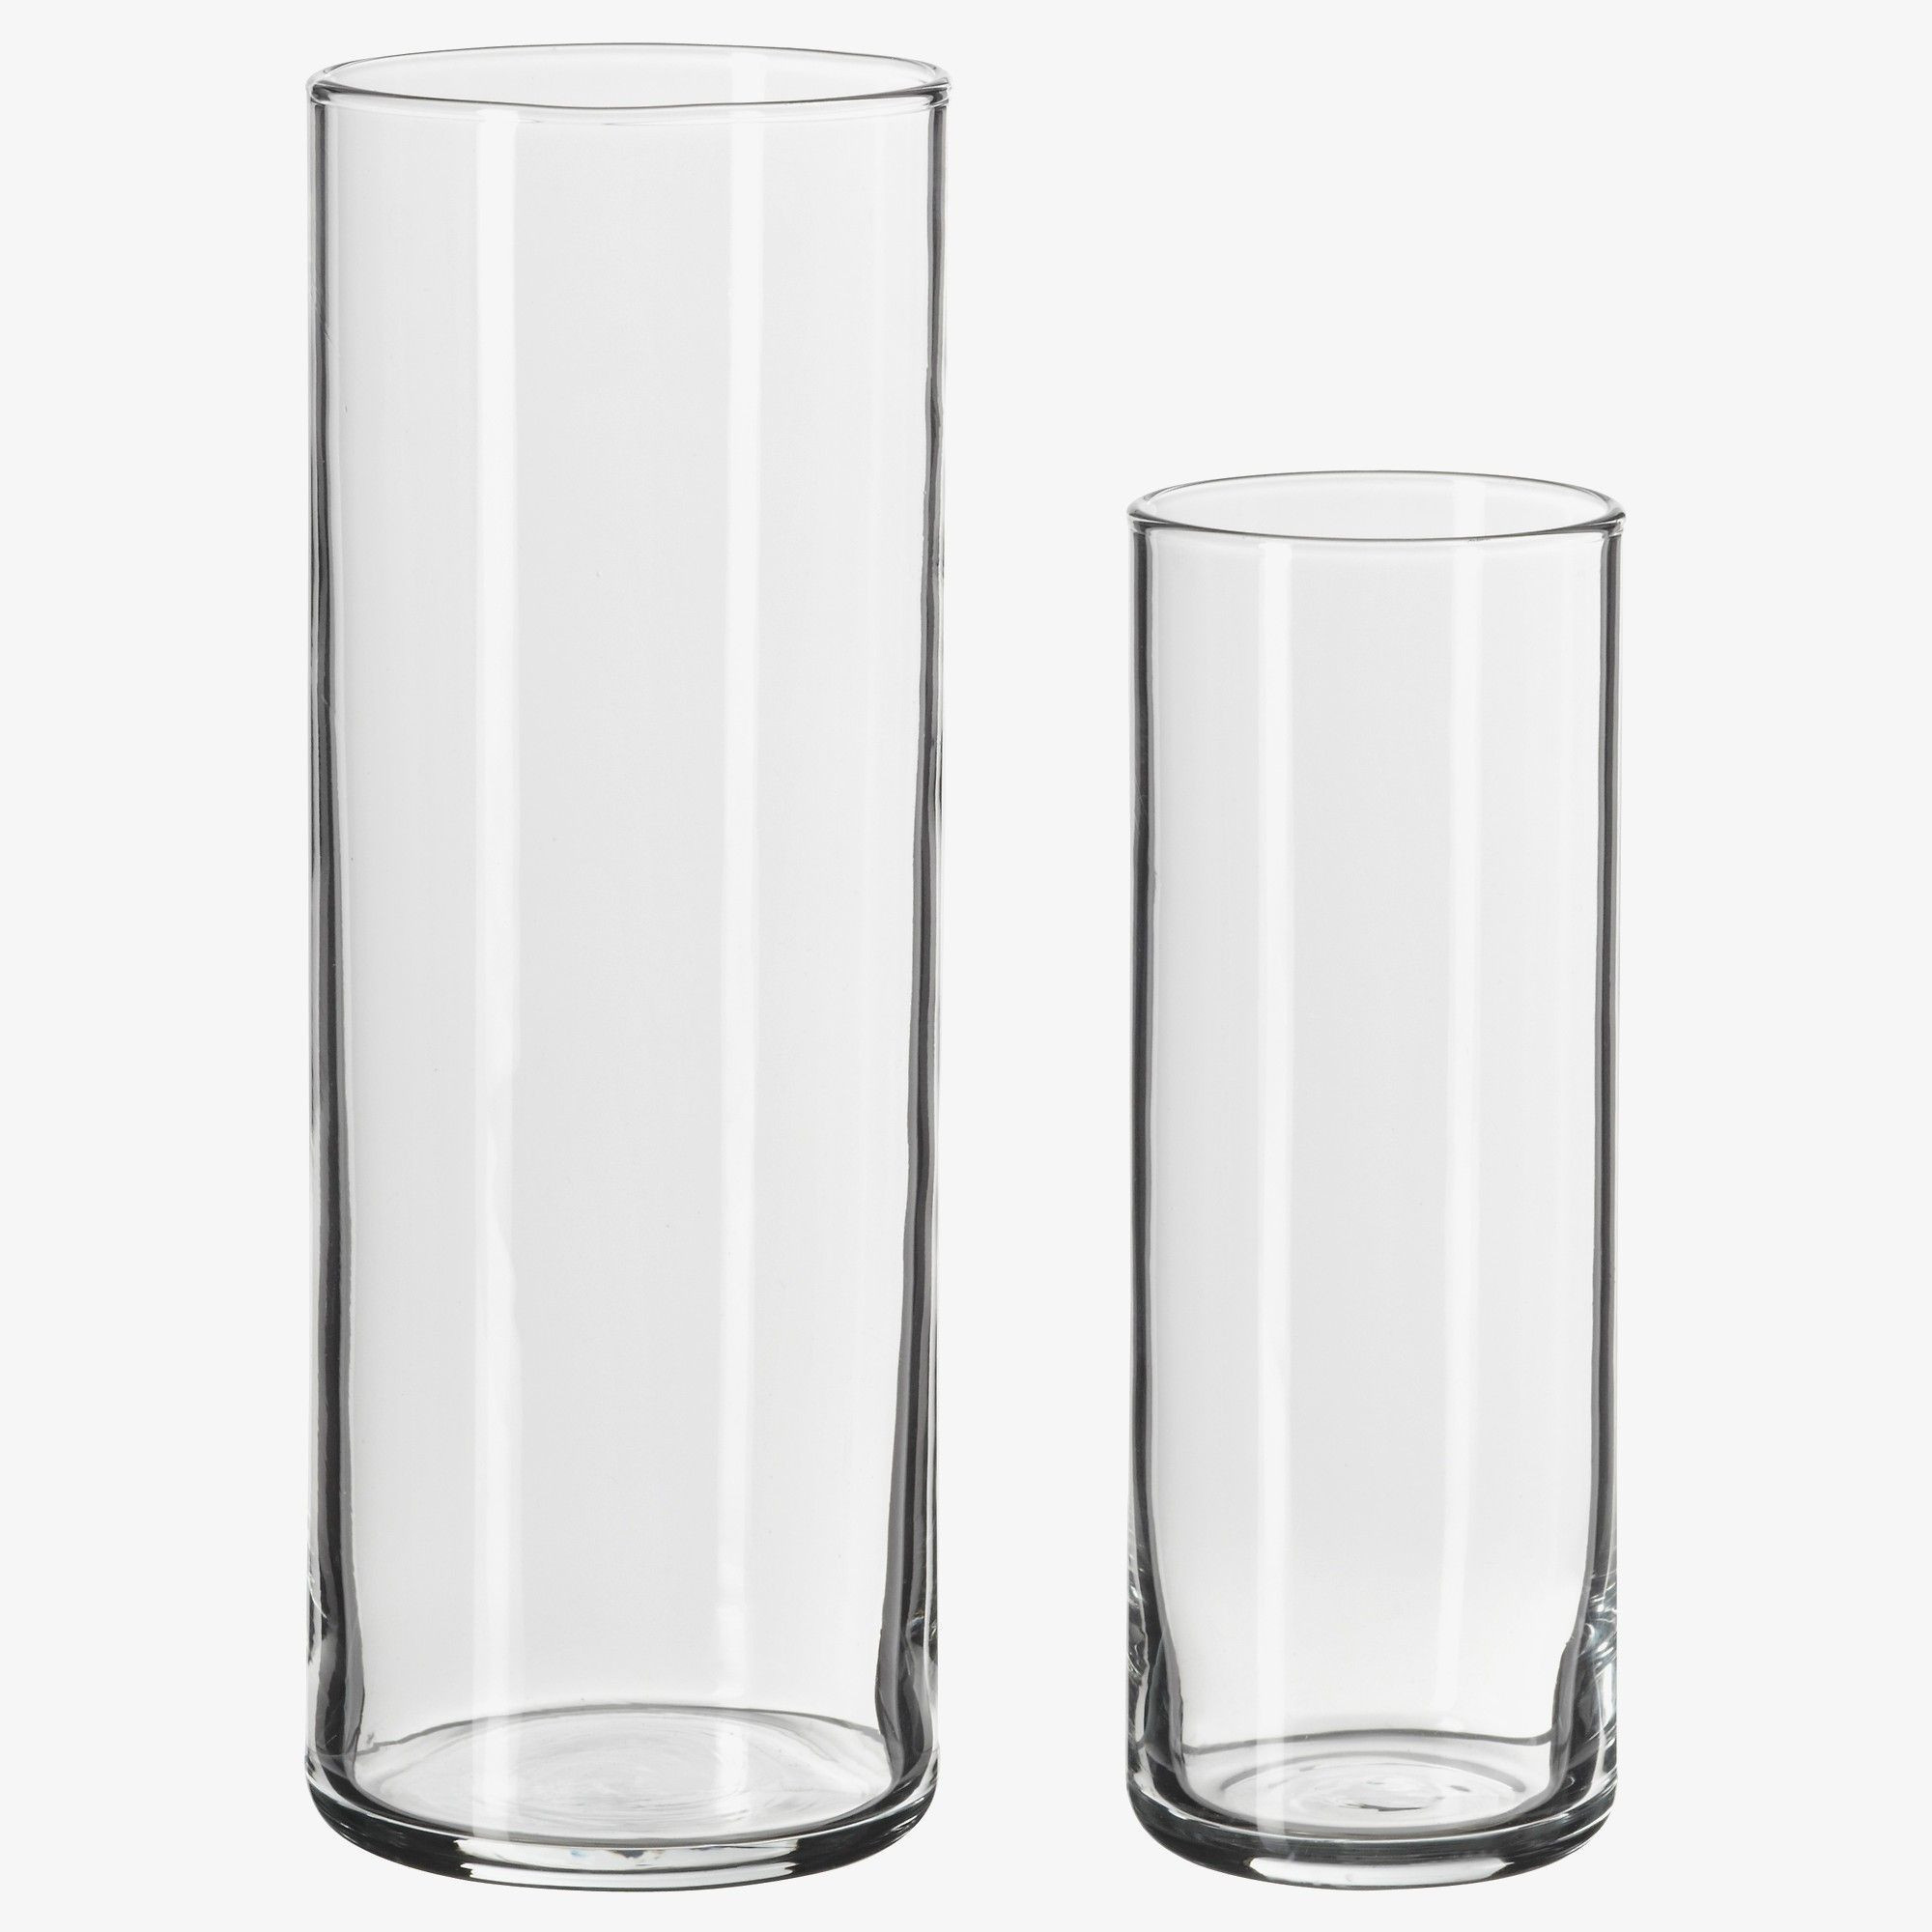 14 Great Clear Cylinder Vases In Bulk 2024 free download clear cylinder vases in bulk of 40 glass vases bulk the weekly world with clear glass tv stand charming new design ikea mantel great pe s5h